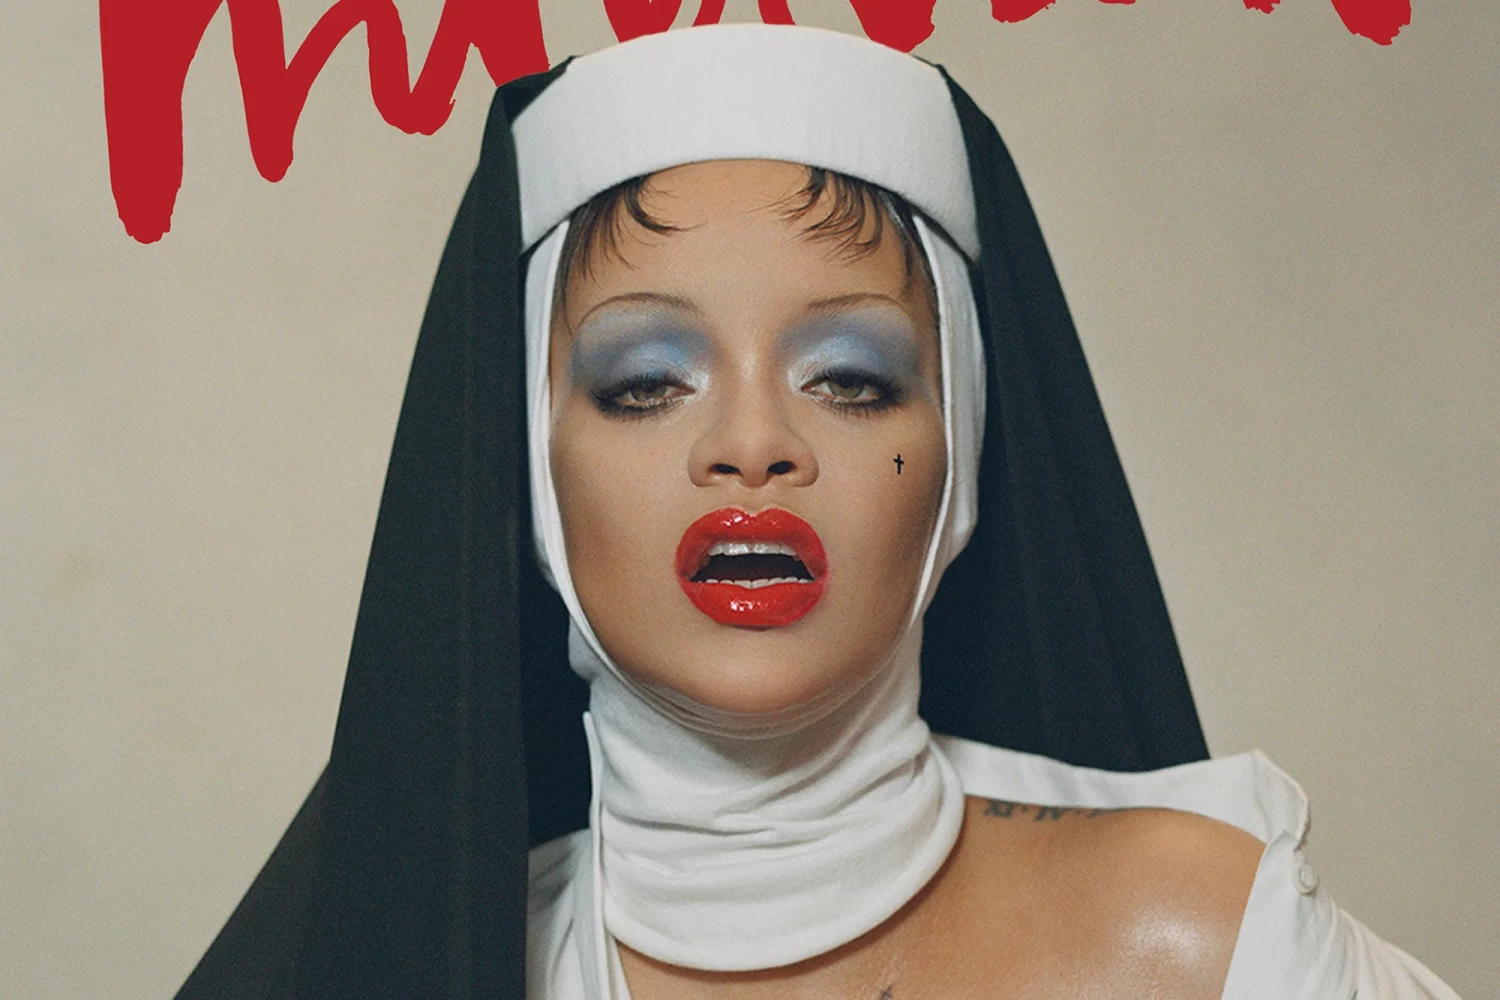 Rihanna is gracing the new cover of Interview magazine, dressed in a skin-baring Dior shirt and a custom wimple from milliner Sarah Sokol. Nadia Lee Cohen/Interview